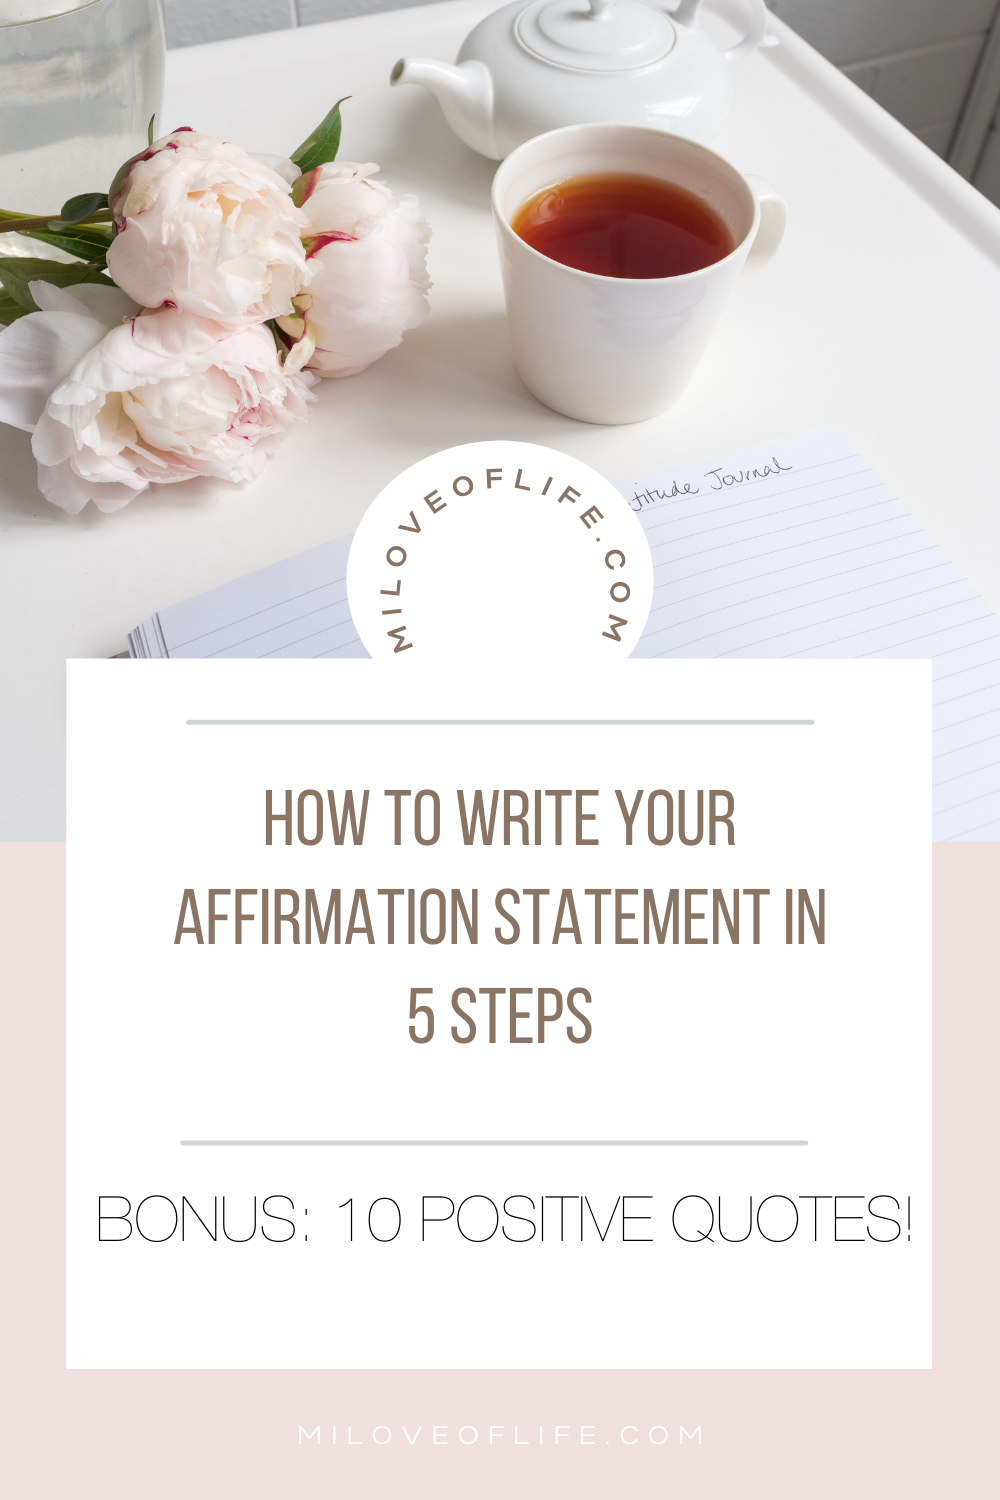 How to Write Your Affirmation Statement in 5 Steps|Bonus 10 Positive Quotes